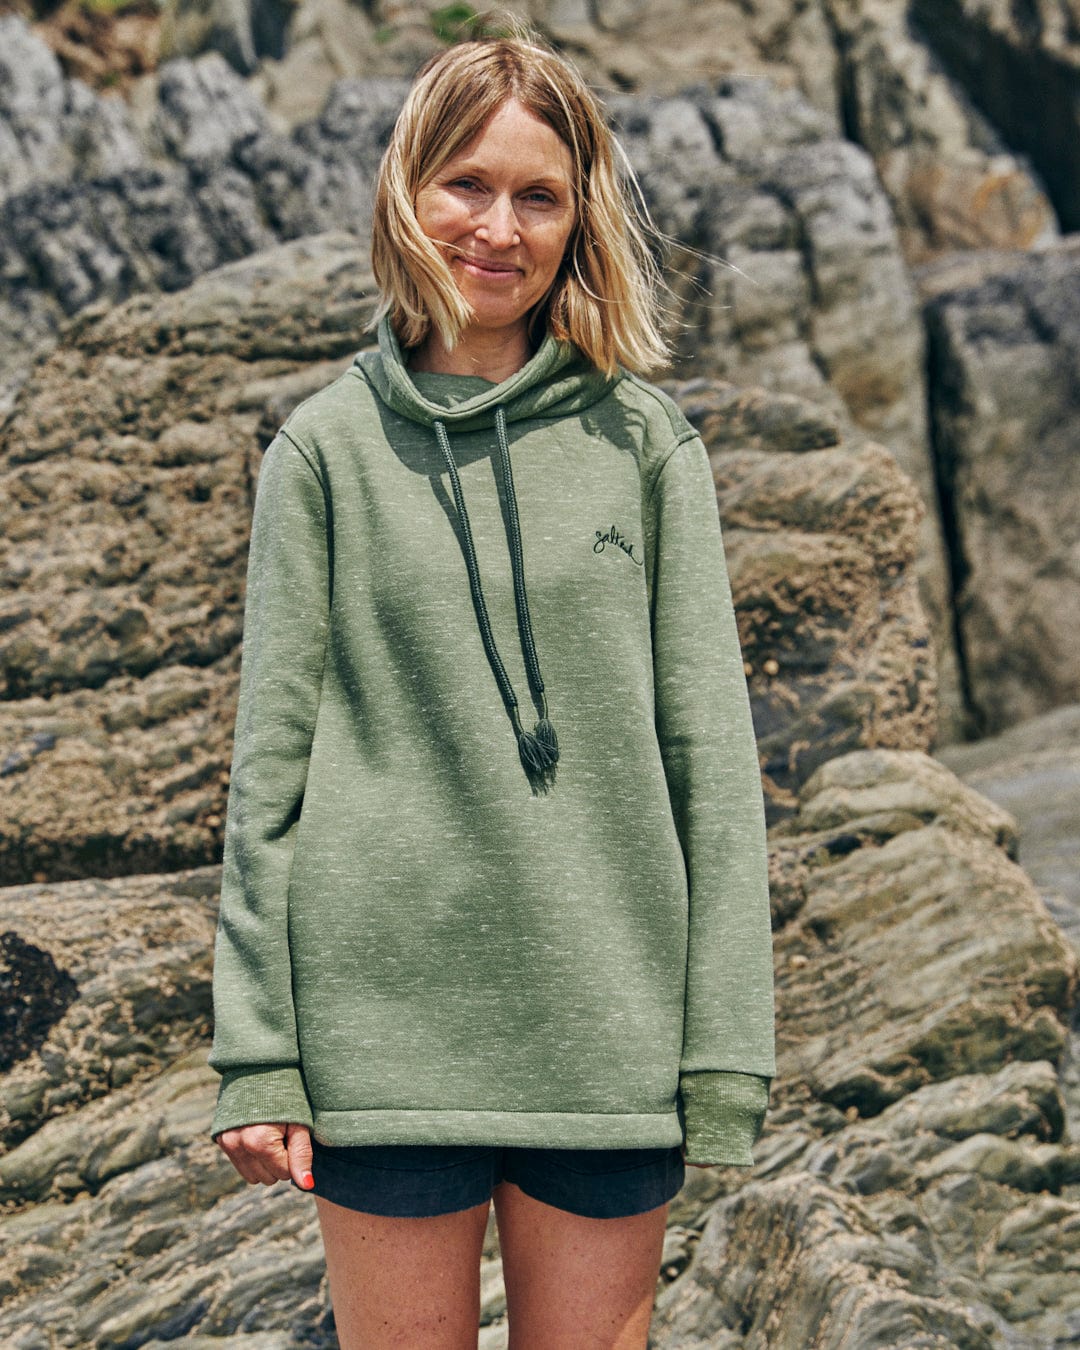 A person stands outdoors in front of large rocks, wearing the Saltrock Harper - Women's Longline Pop Sweat in green and shorts, their hands by their sides.